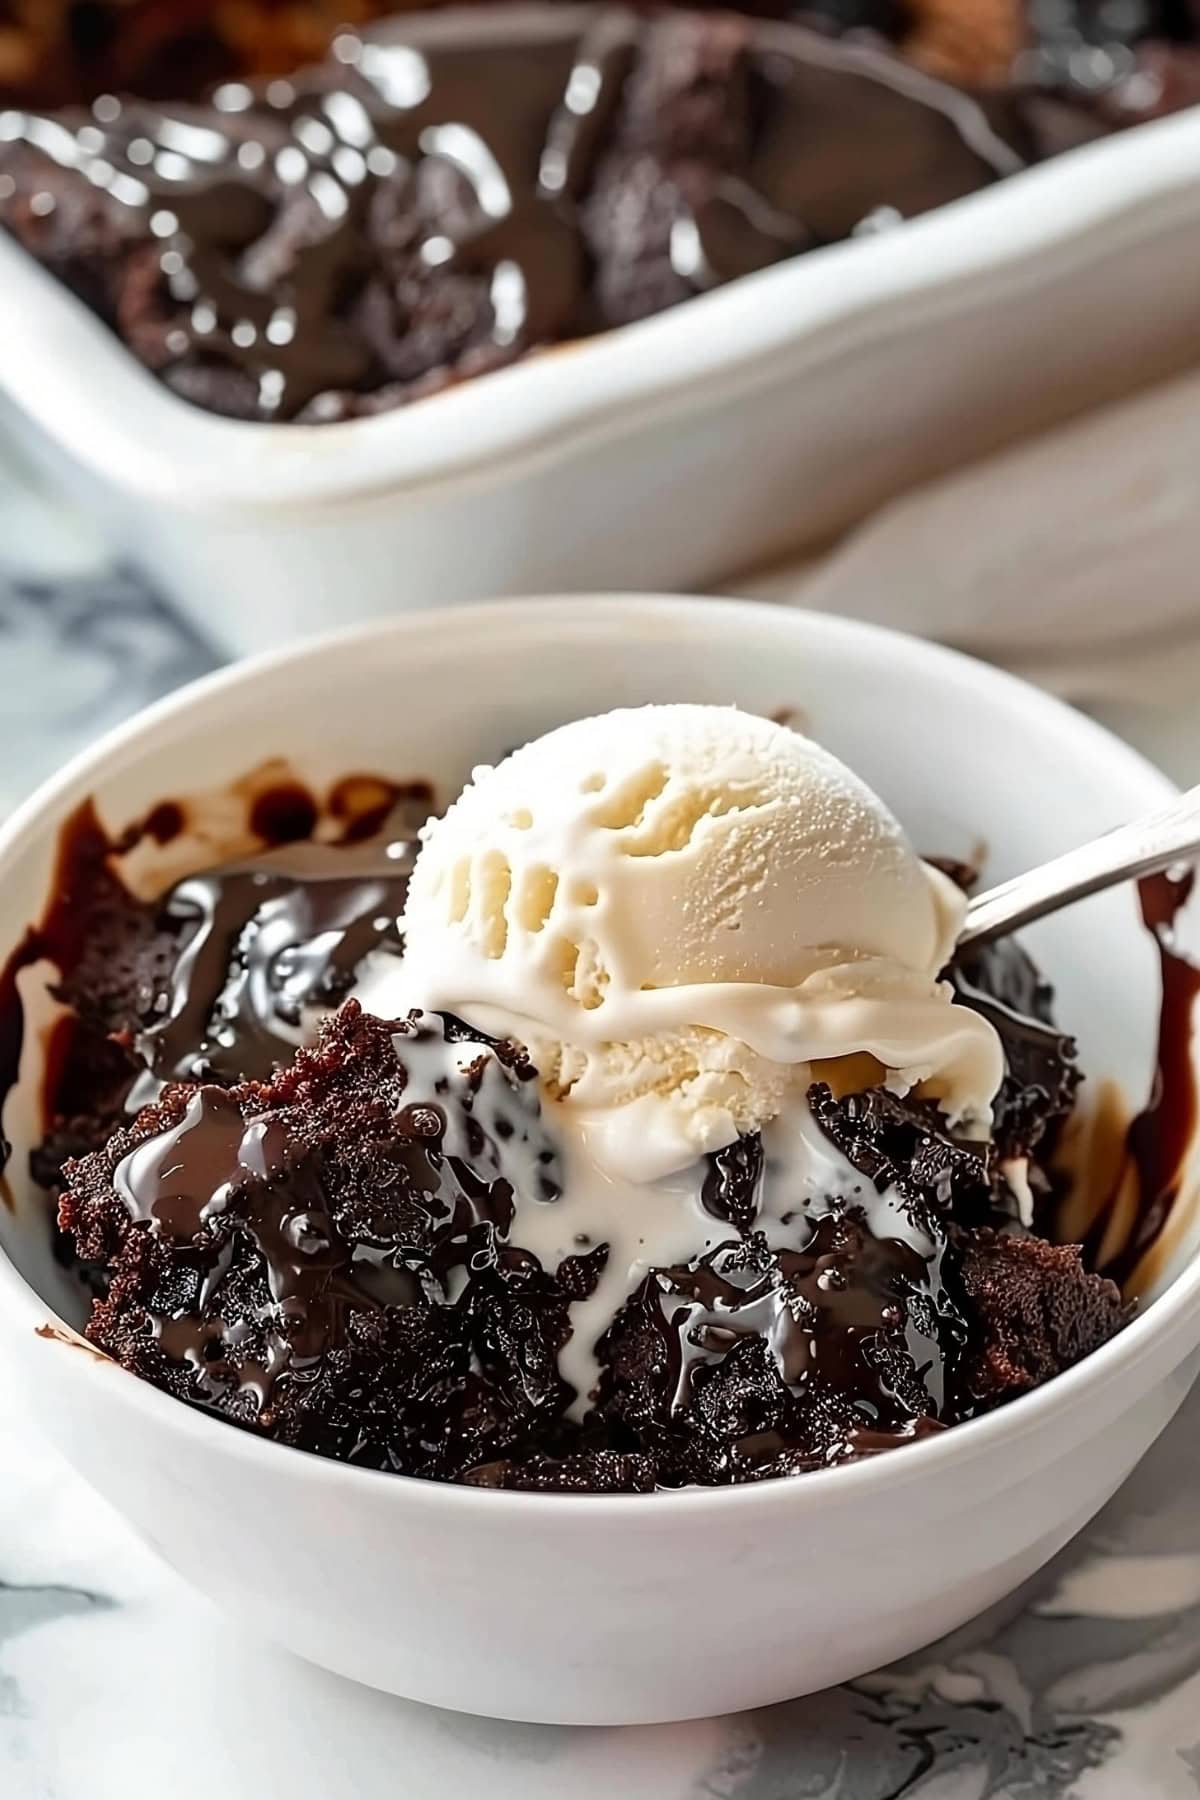 Chocolatey hot fudge cake topped with vanilla ice cream served in a white bowl.